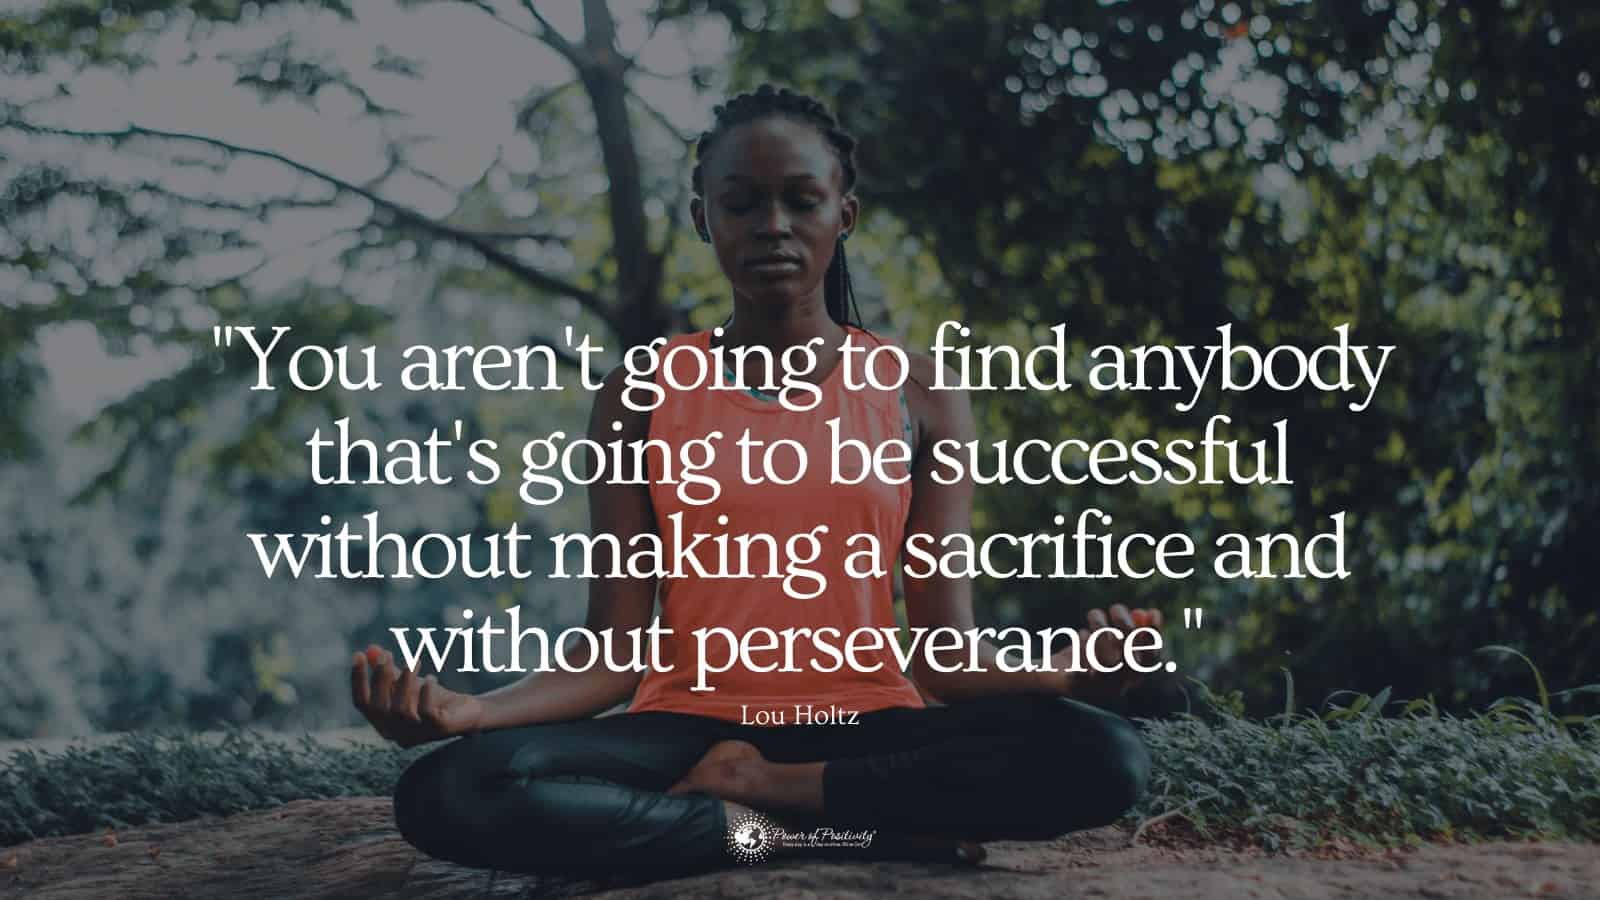 15 Quotes About Perseverance to Motivate Success